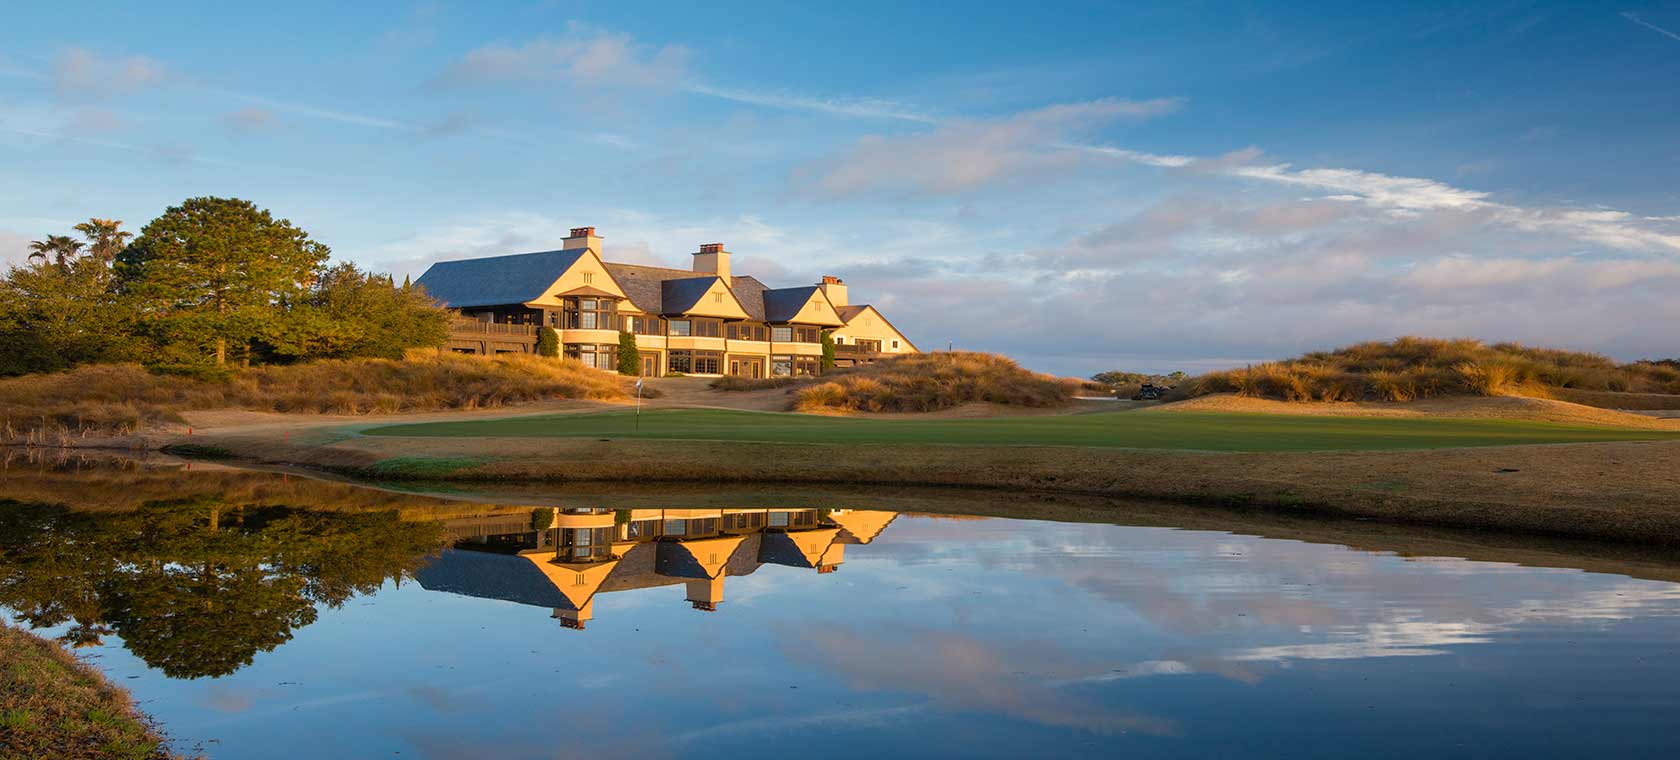 Town & Country Names Kiawah the Hamptons of the South